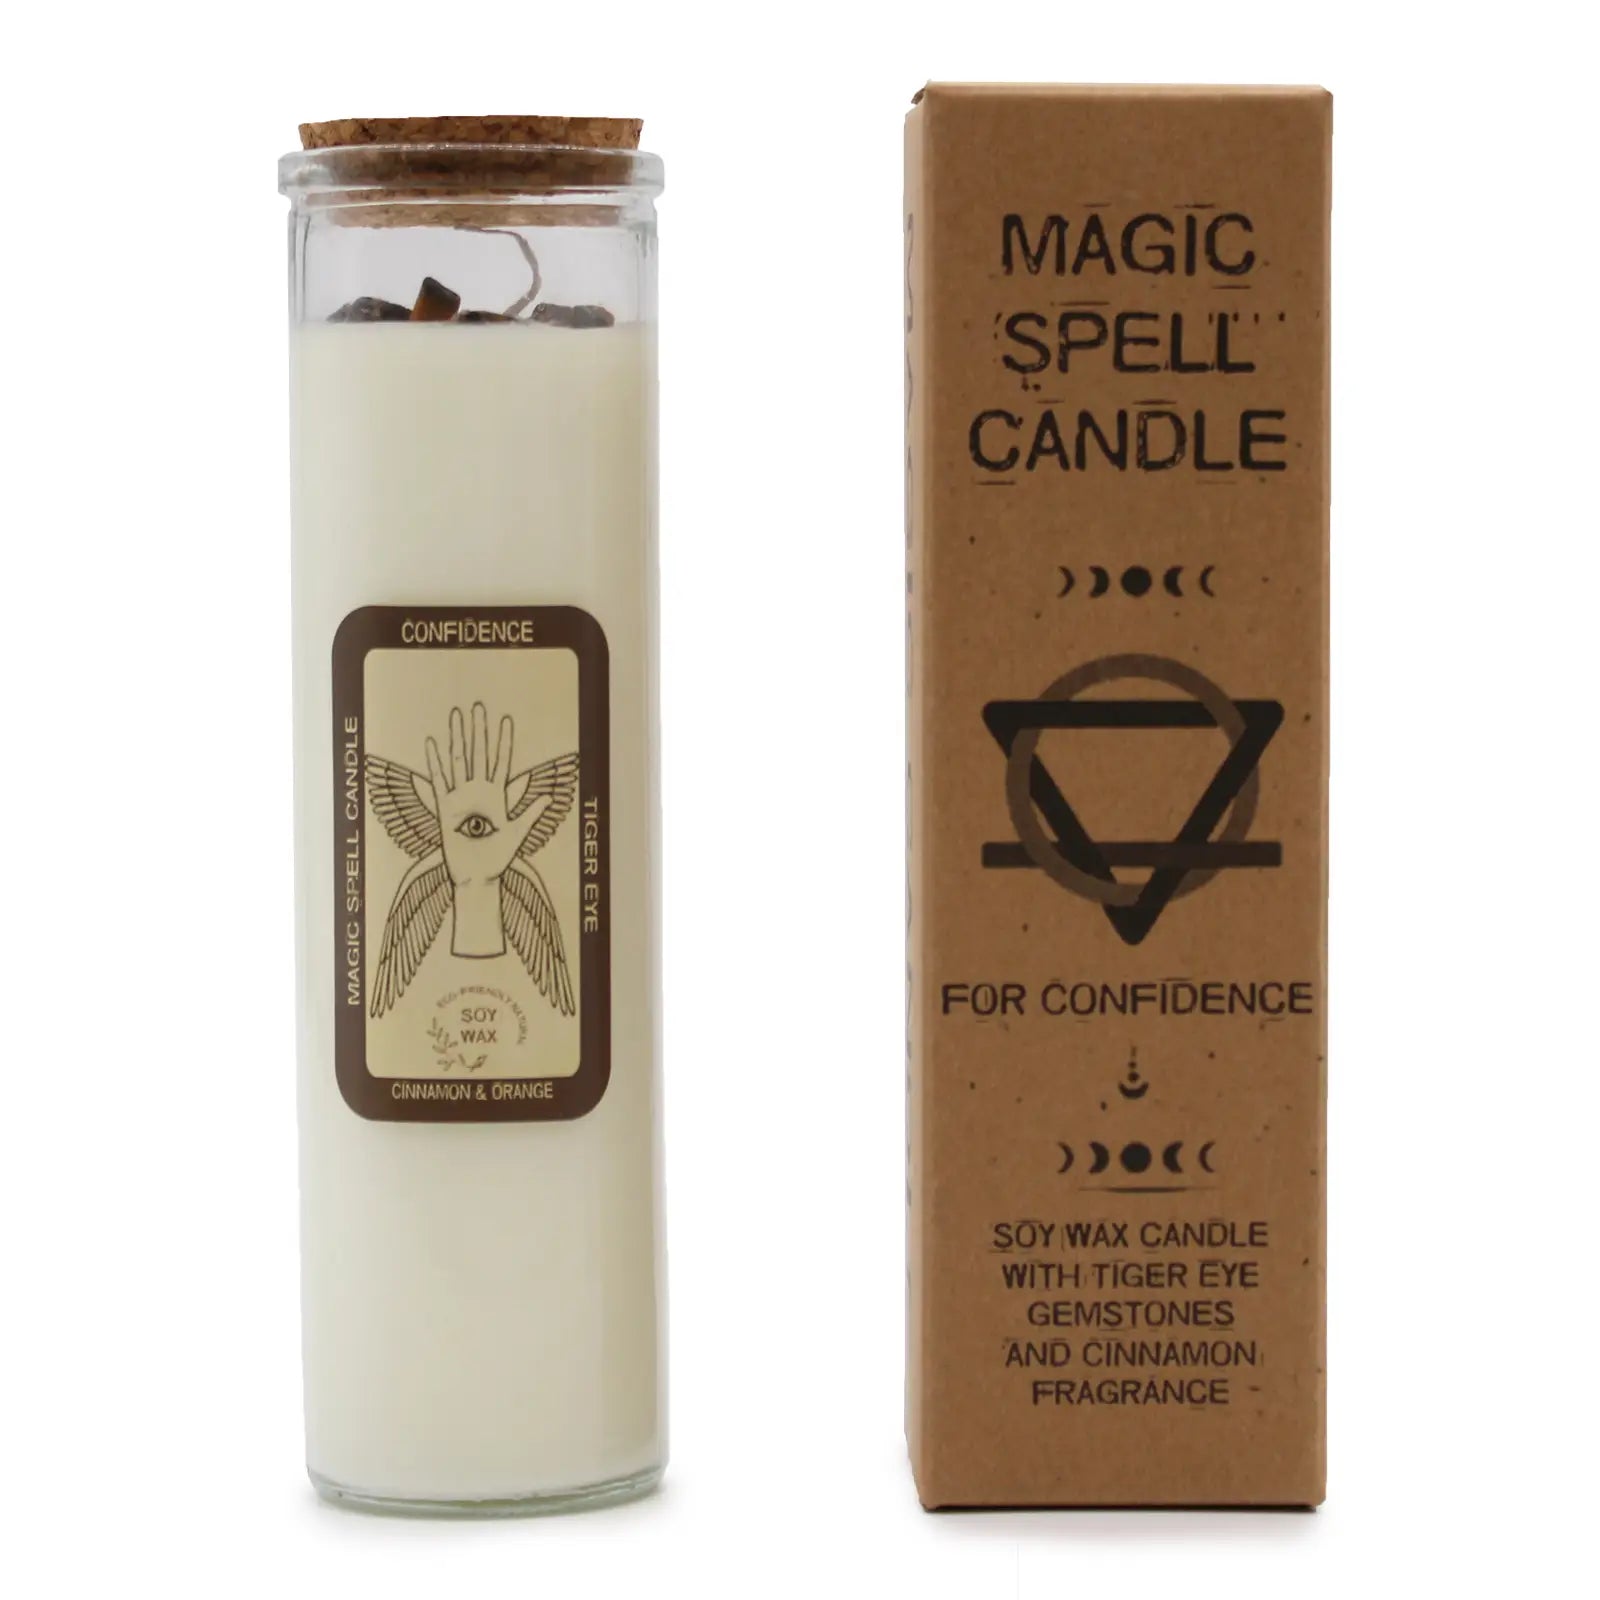 Magic Spell Candle - Confidence - Spellbound